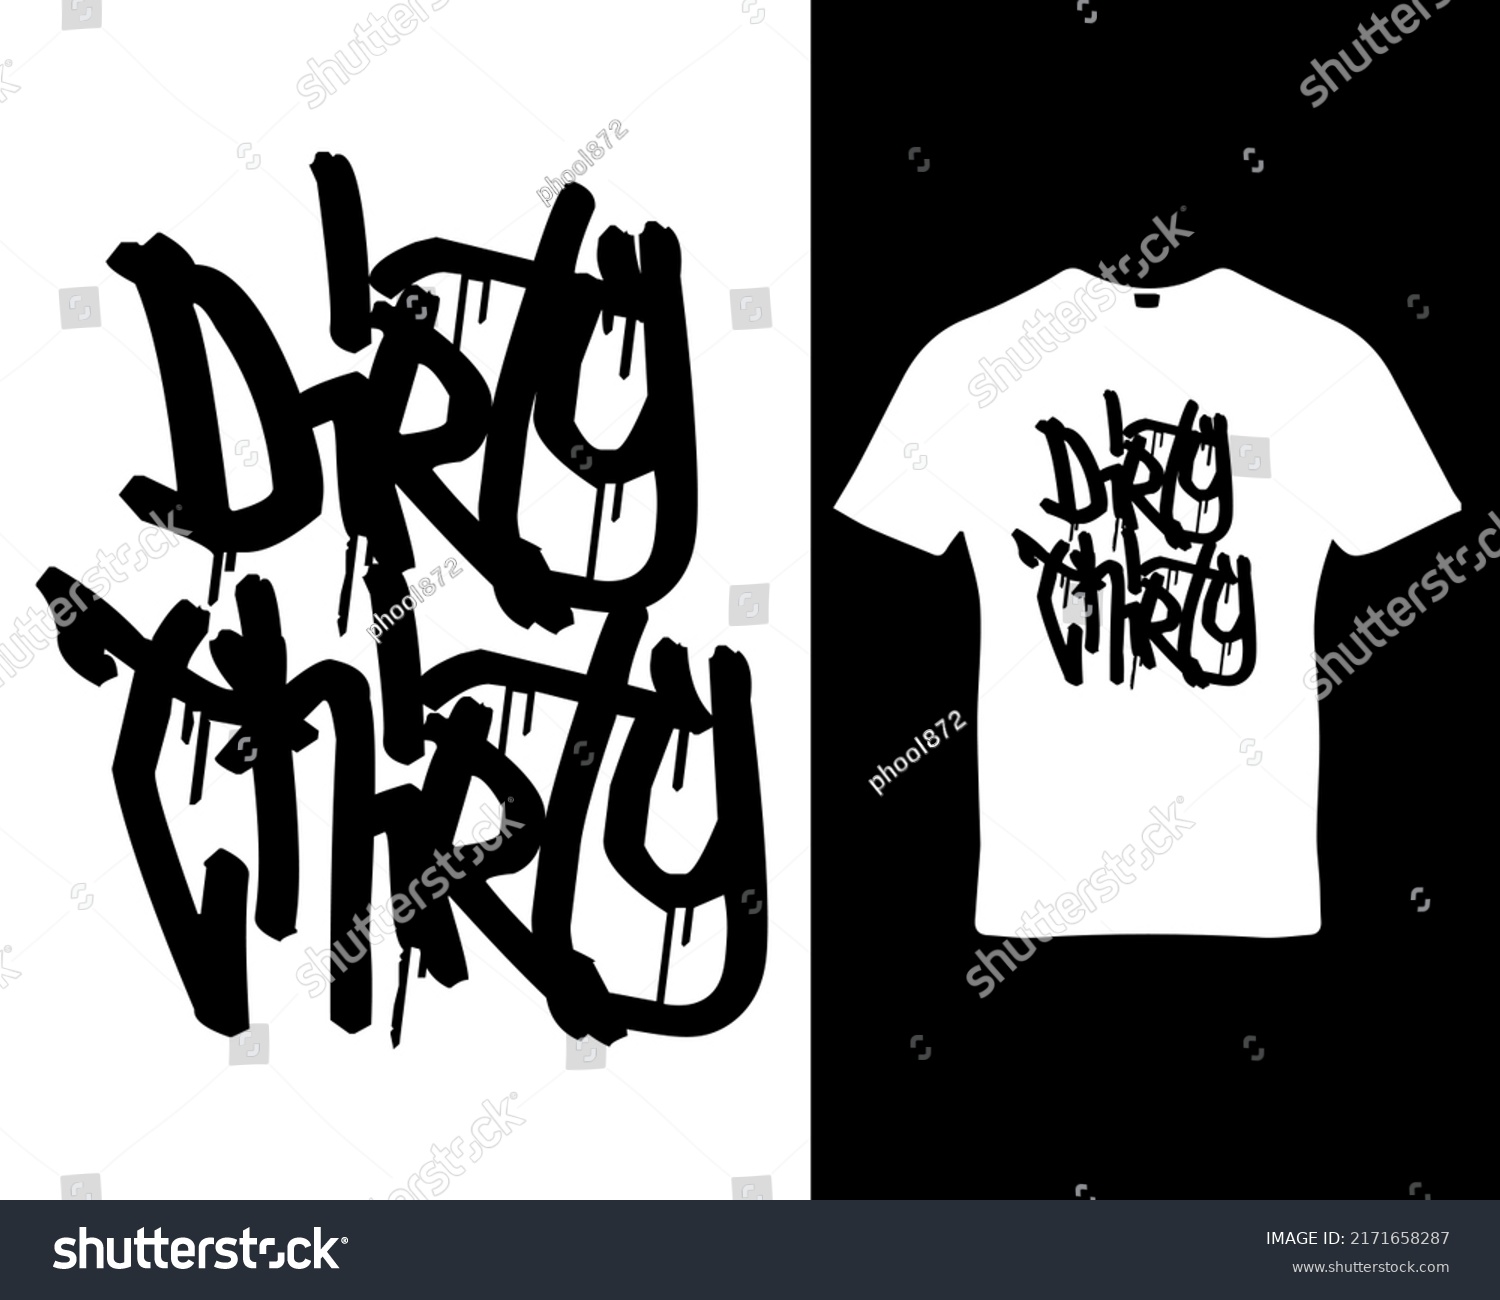 SVG of Dirty thirty quote custom graffiti typography t-shirt,banner,poster,cards,cases,cover design template vector.
 svg